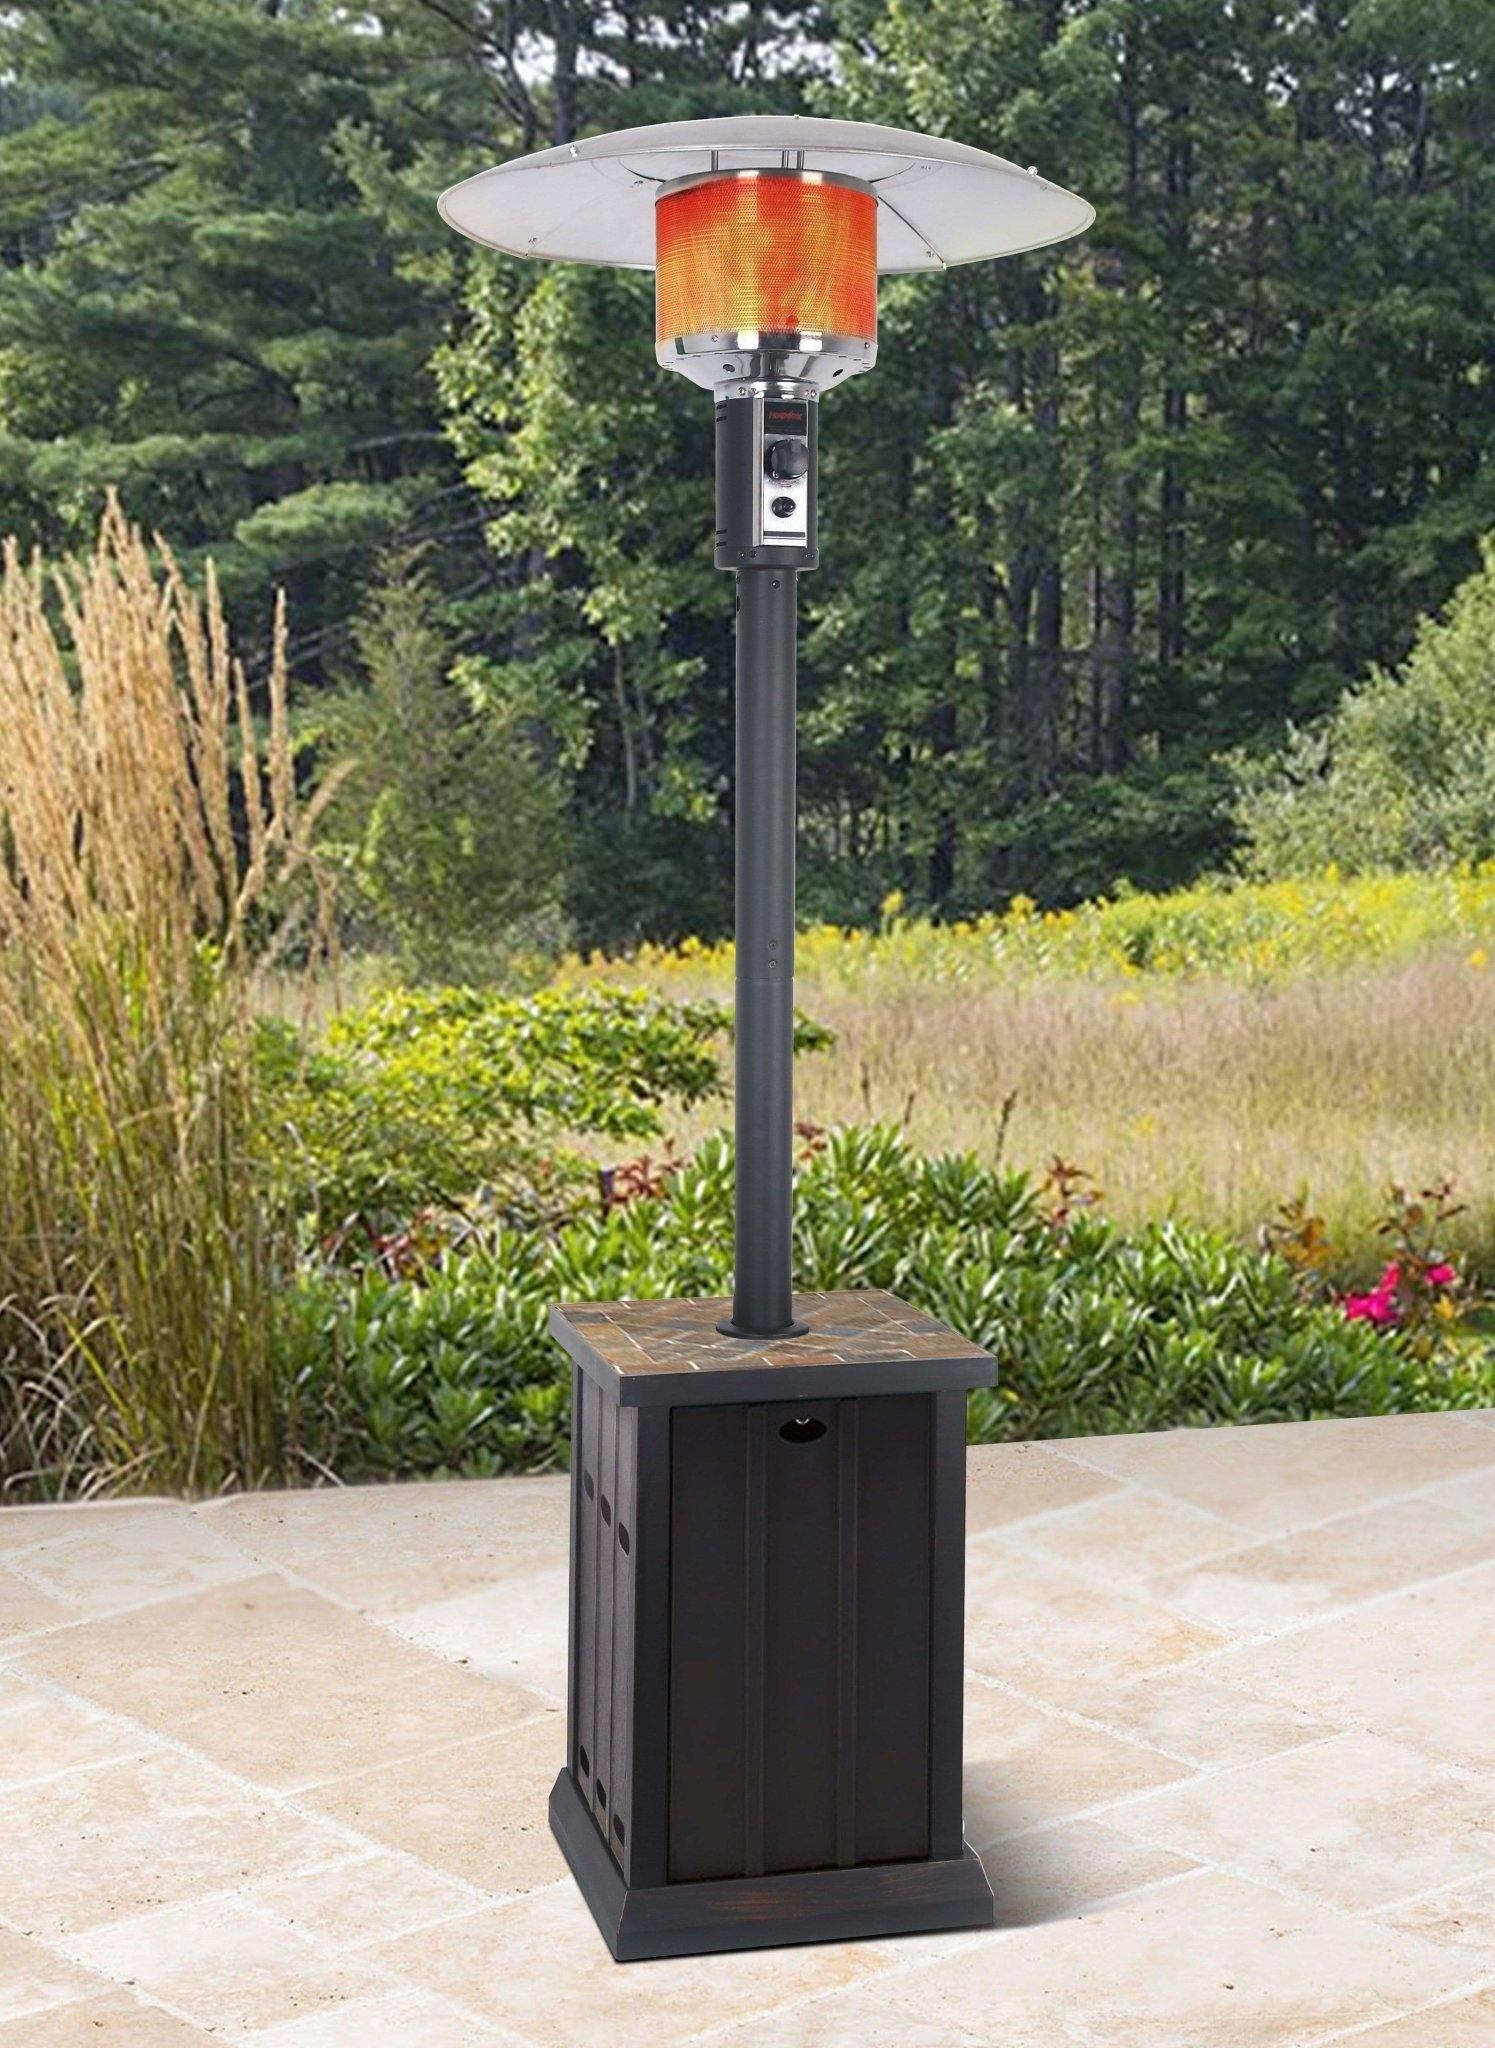 Patio Heater with Tile Tabletop - DTI Direct USA